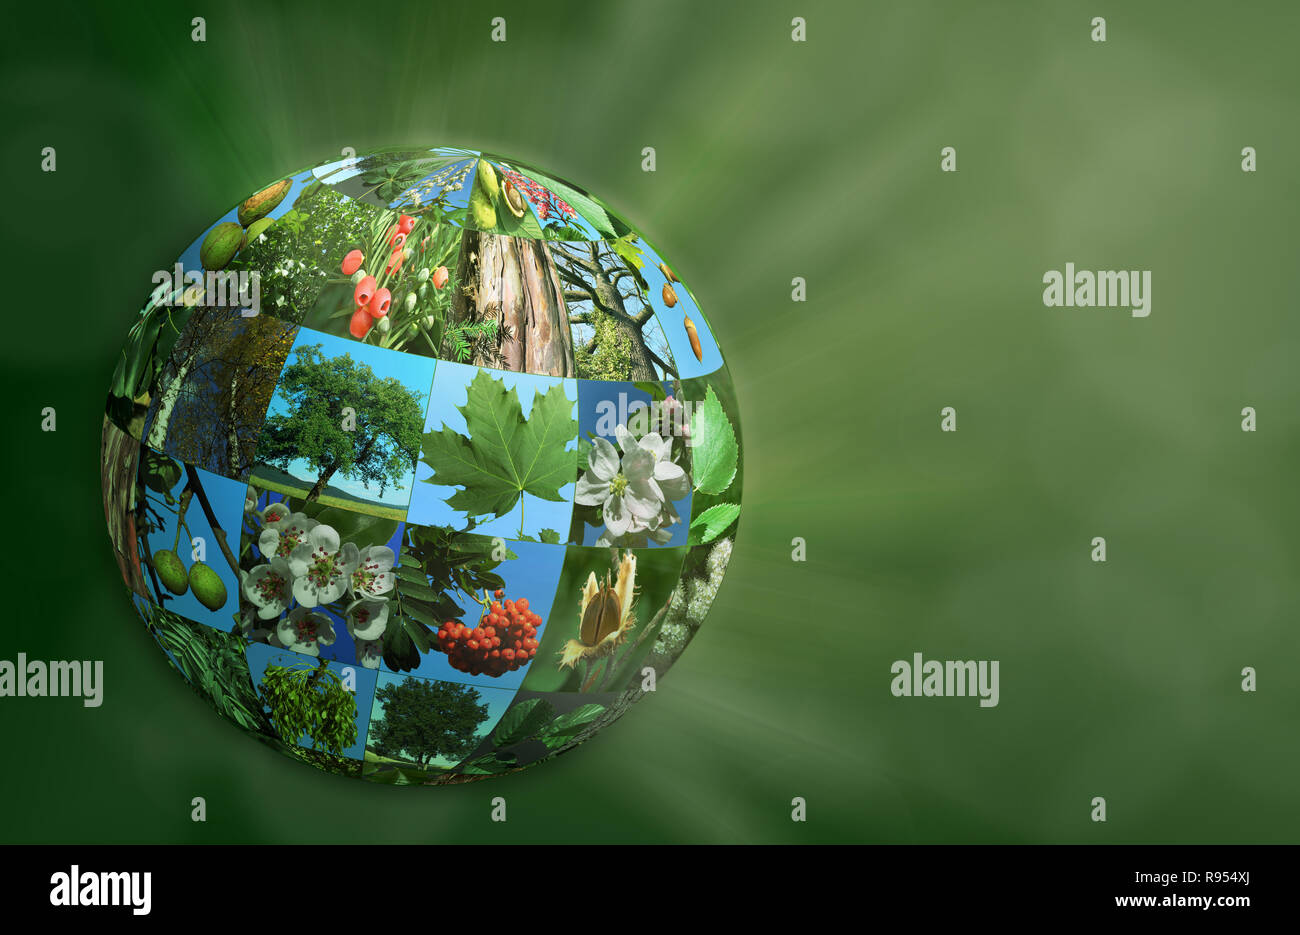 planet globe nature green eco ecological natural 3d illustration Stock Photo